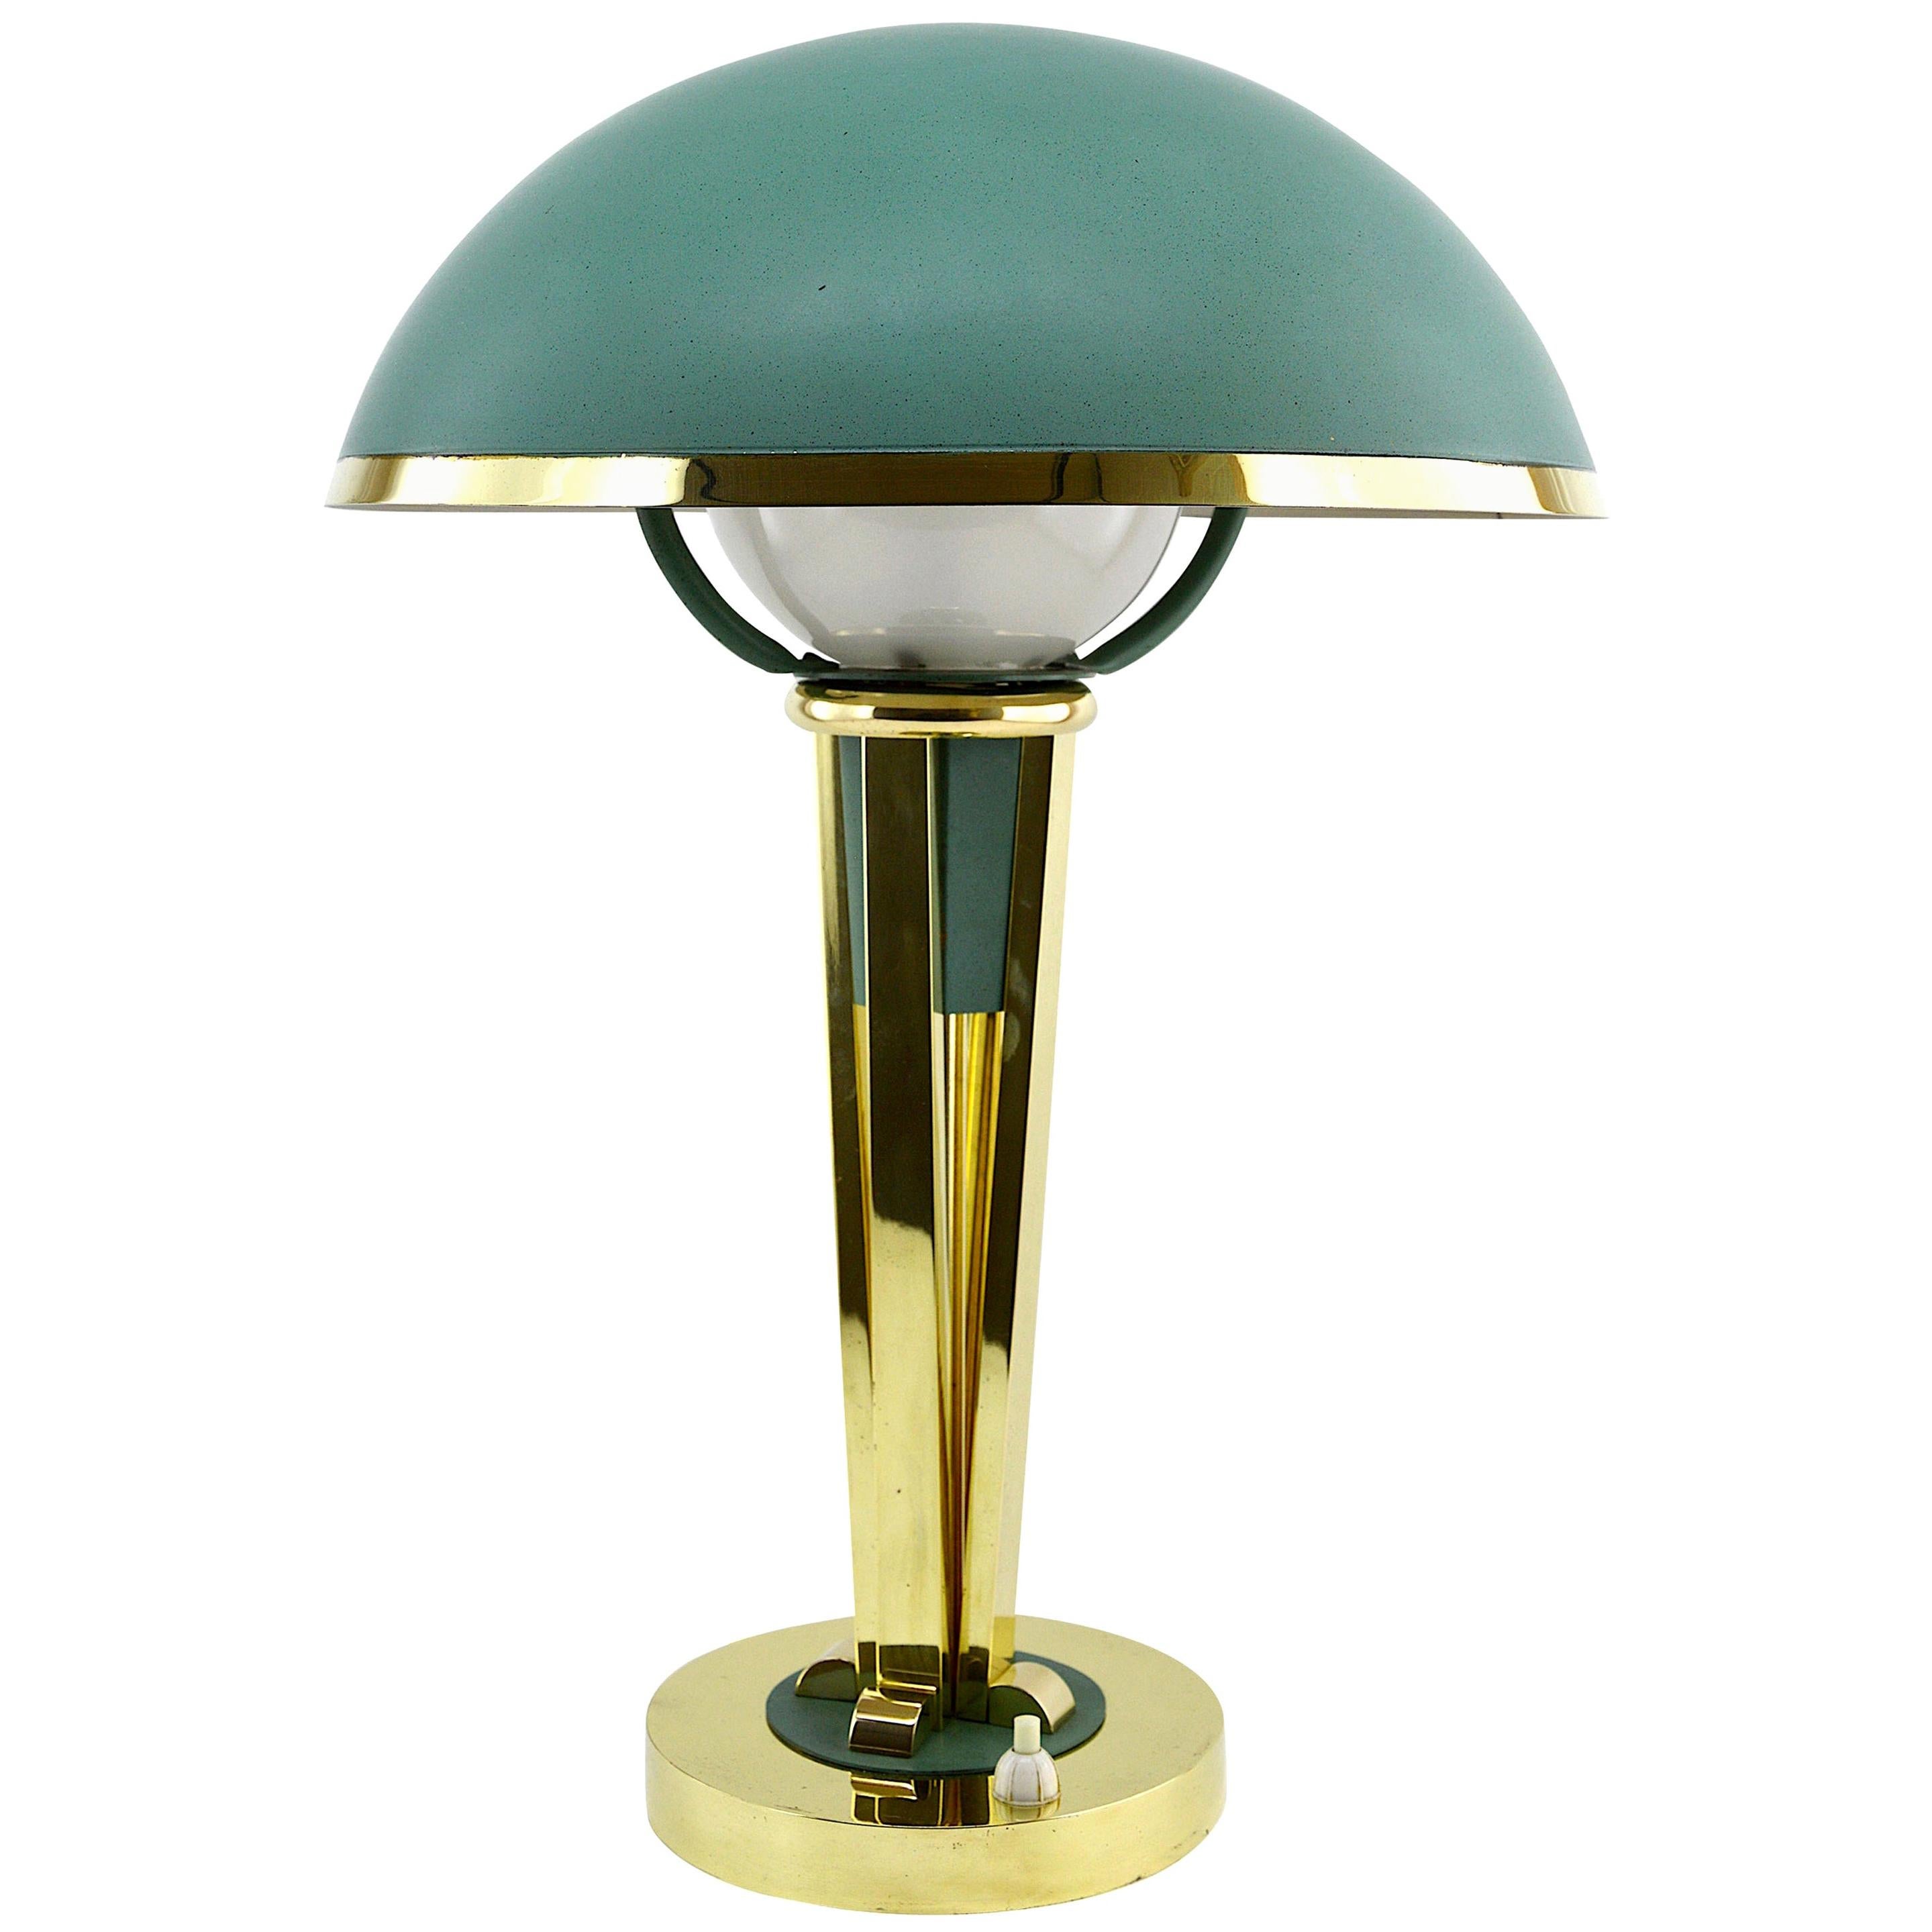 Jacques Adnet French Art Deco Desk or Table Lamp, circa 1940